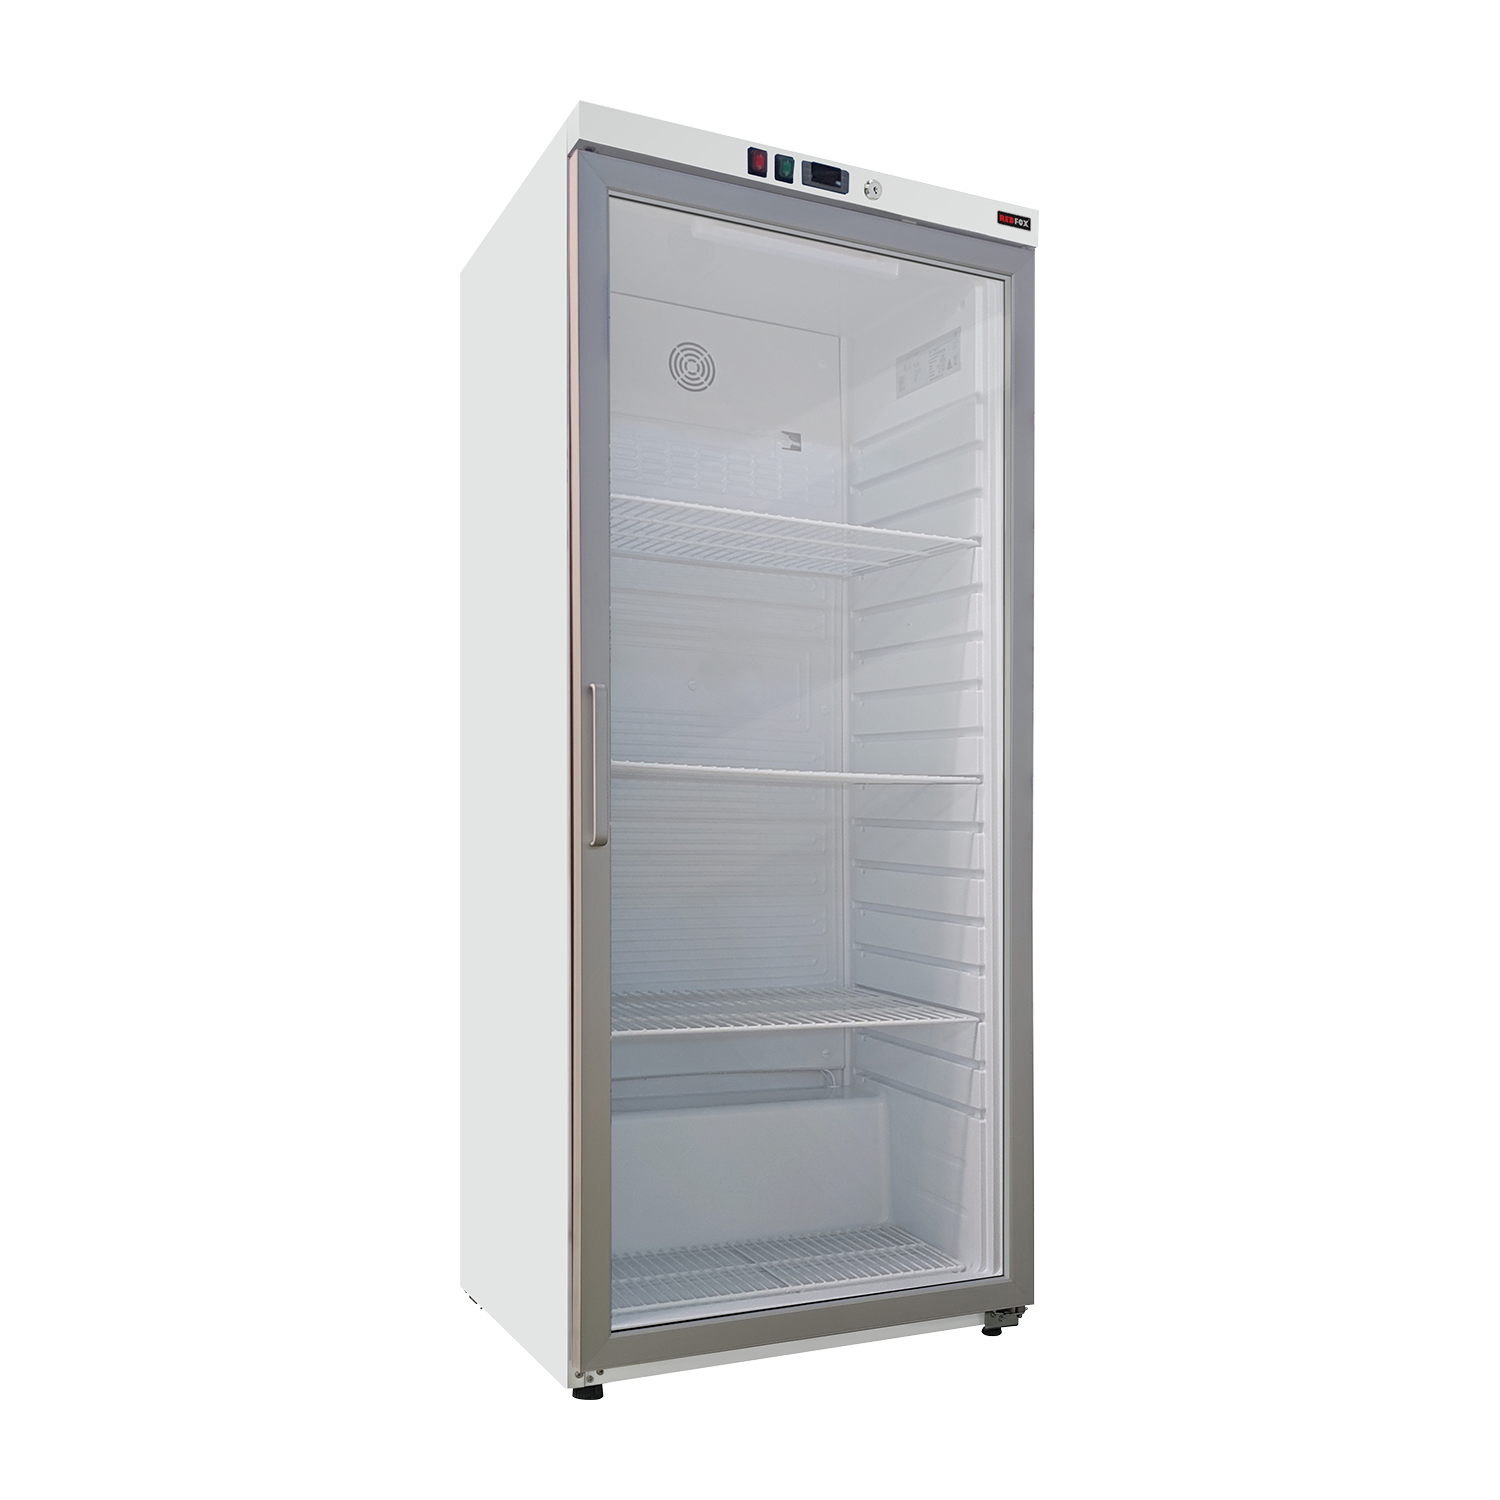 Cooling cabinet 350 l, glass door, white | REDFOX - DRR 400/G